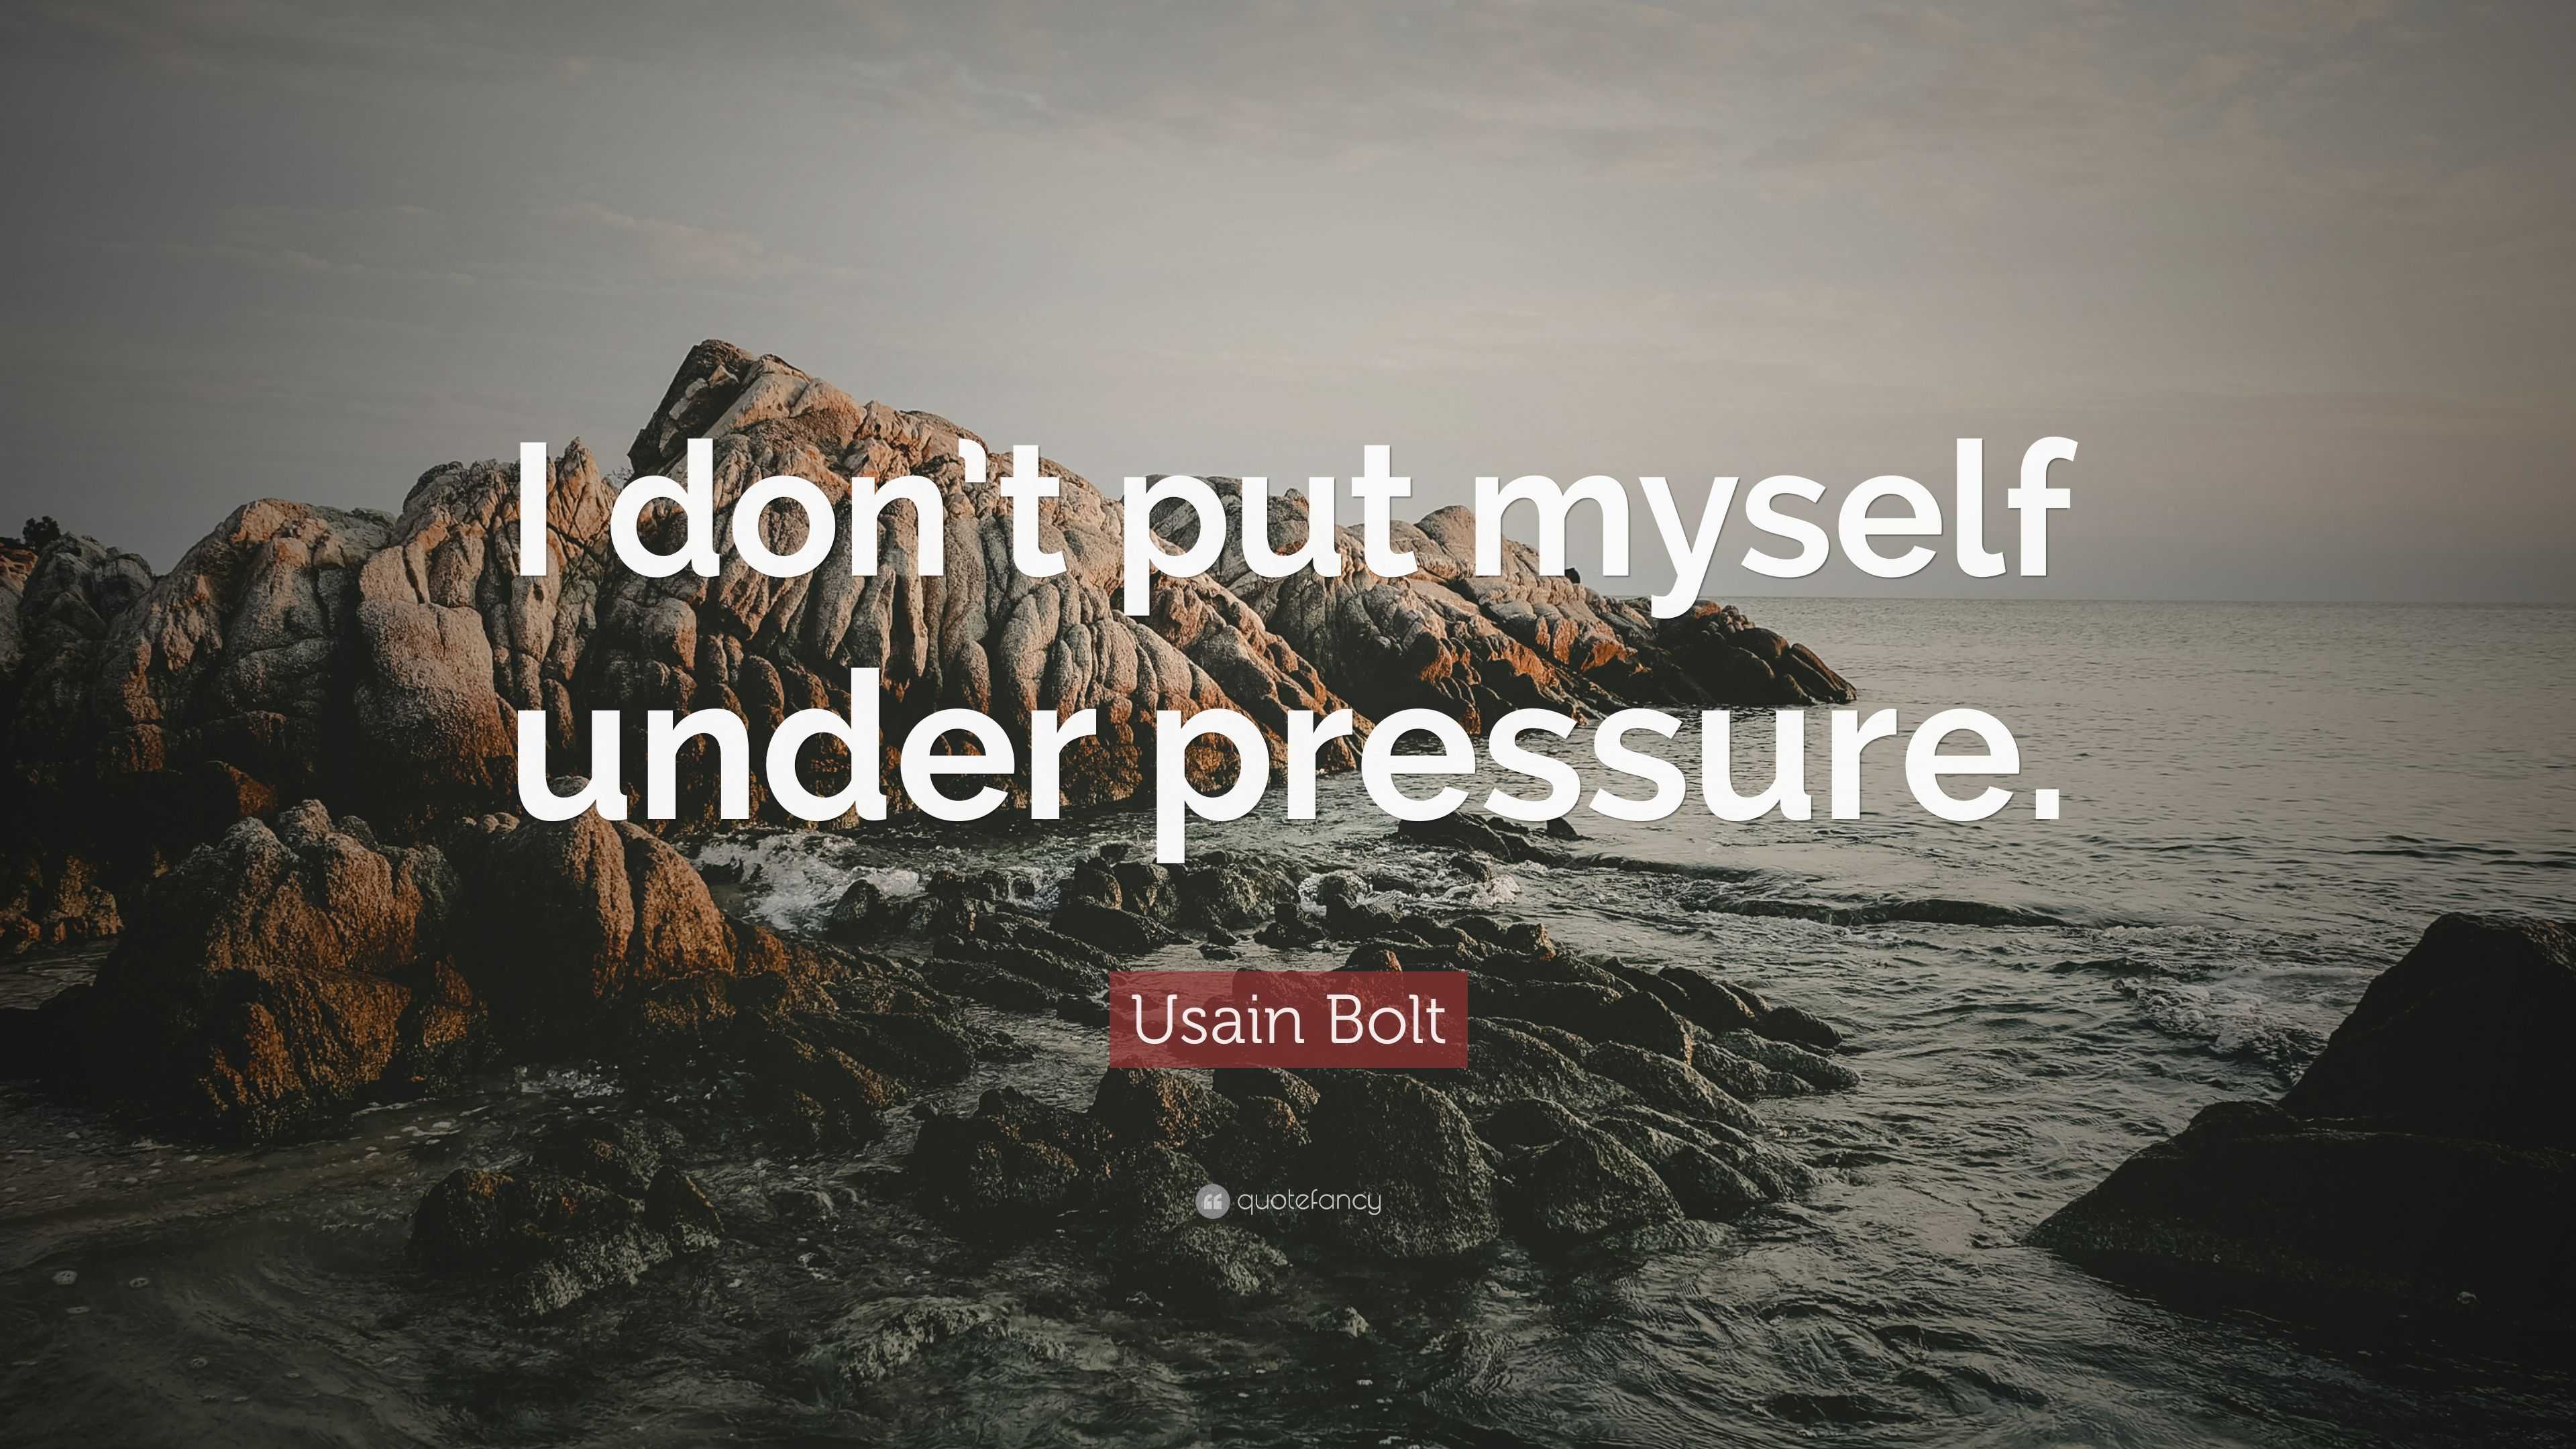 Don't ever allow yourself to fold under pressure. Pause, reflect